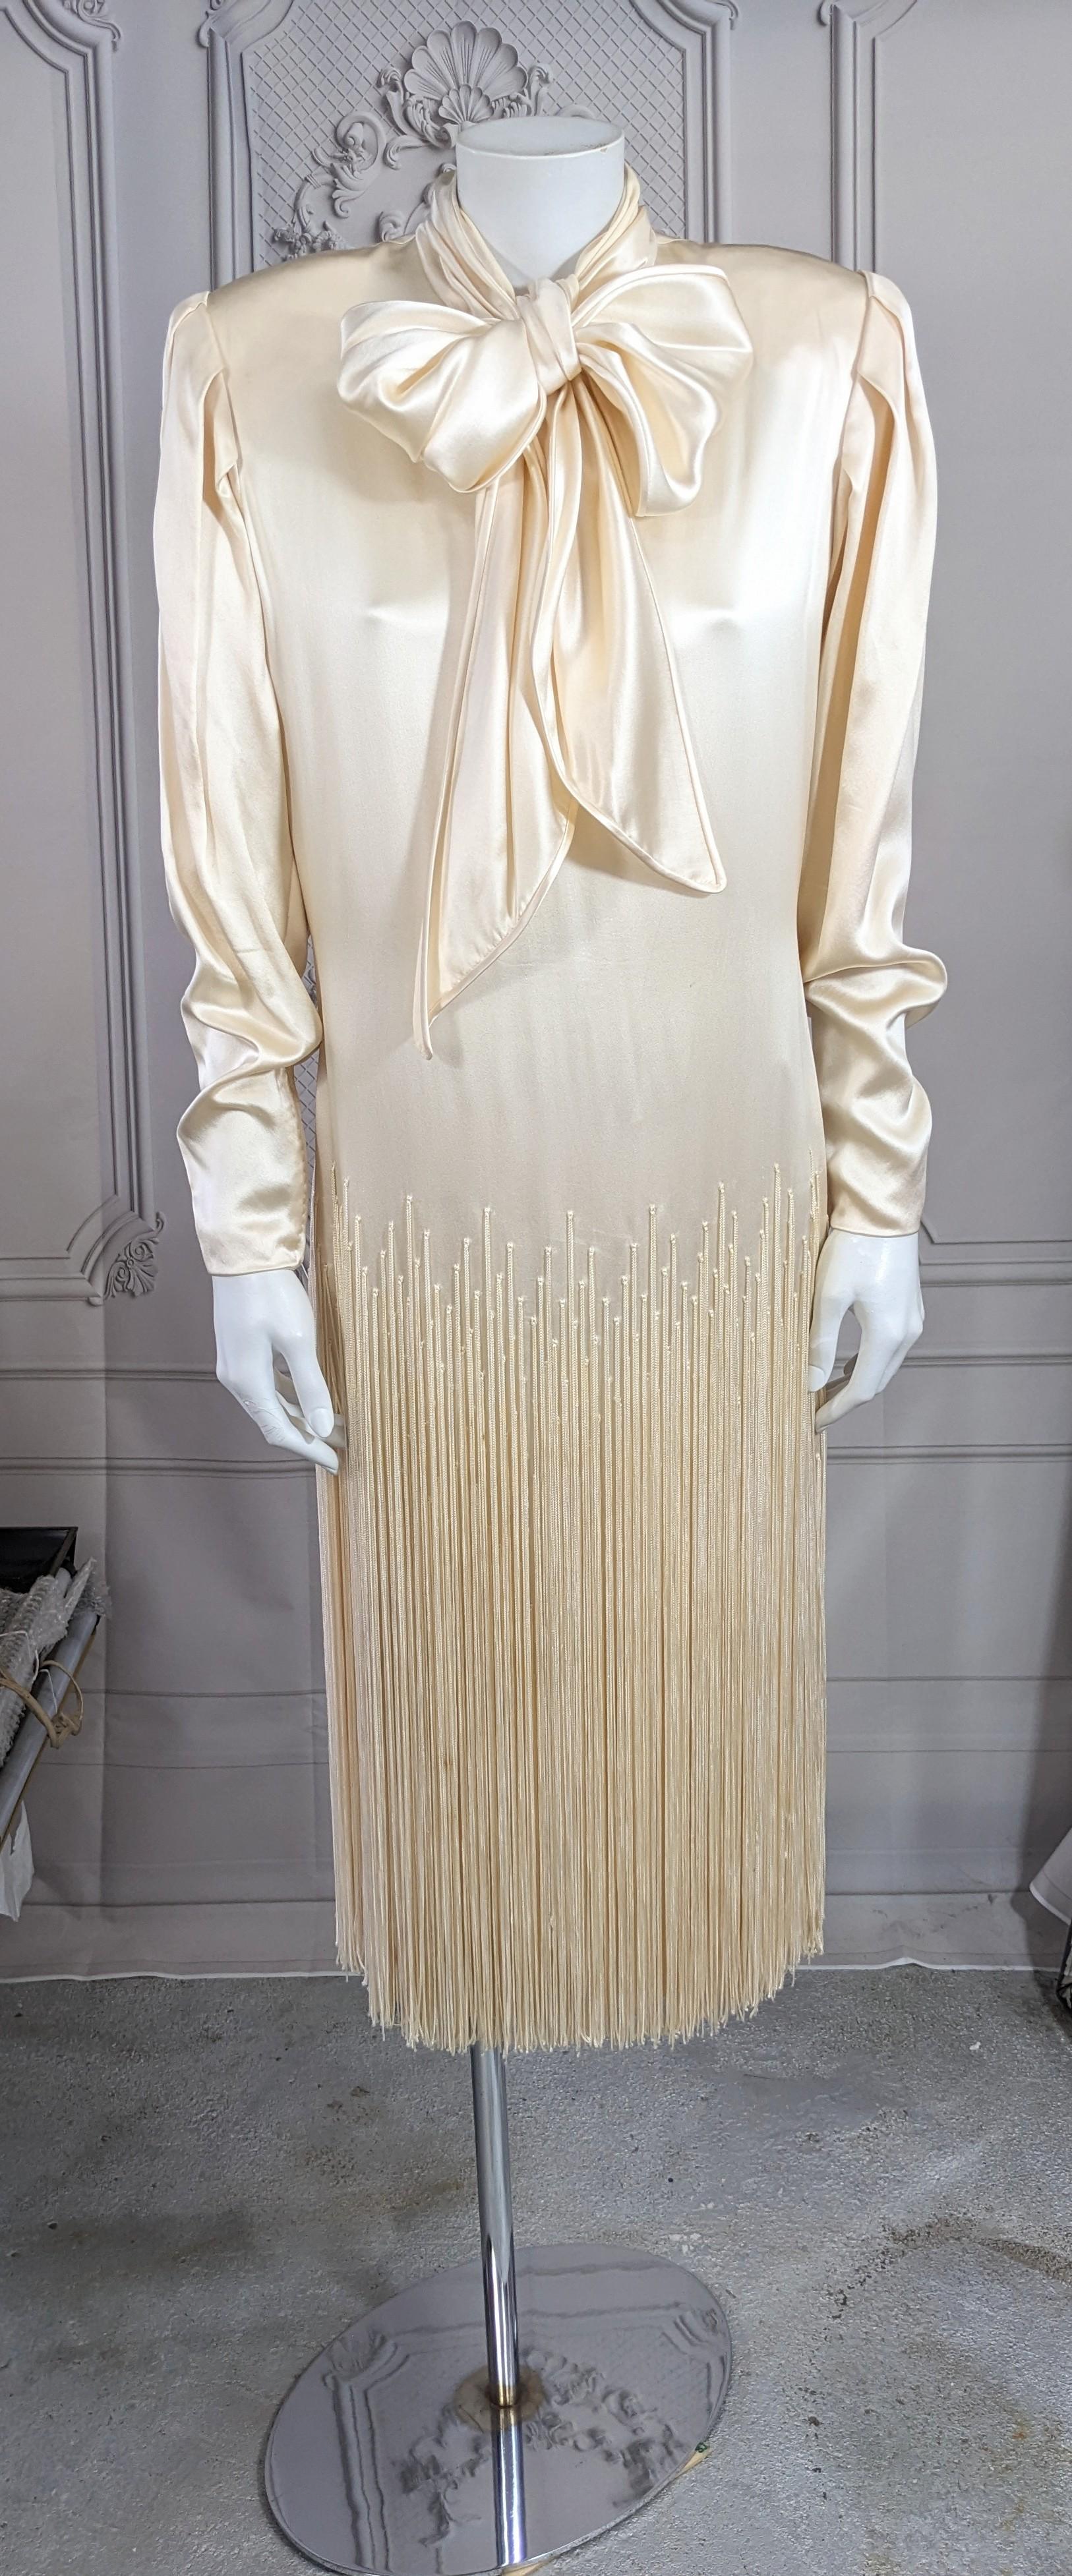 James Galanos Silk Satin Hand Fringed Dress from the 1980's. Silk satin with long sash tie collar, shoulder pads and hand fringing from the hip level down. Beautiful quality construction as to be expected with back and wrist zippers. Wonderful